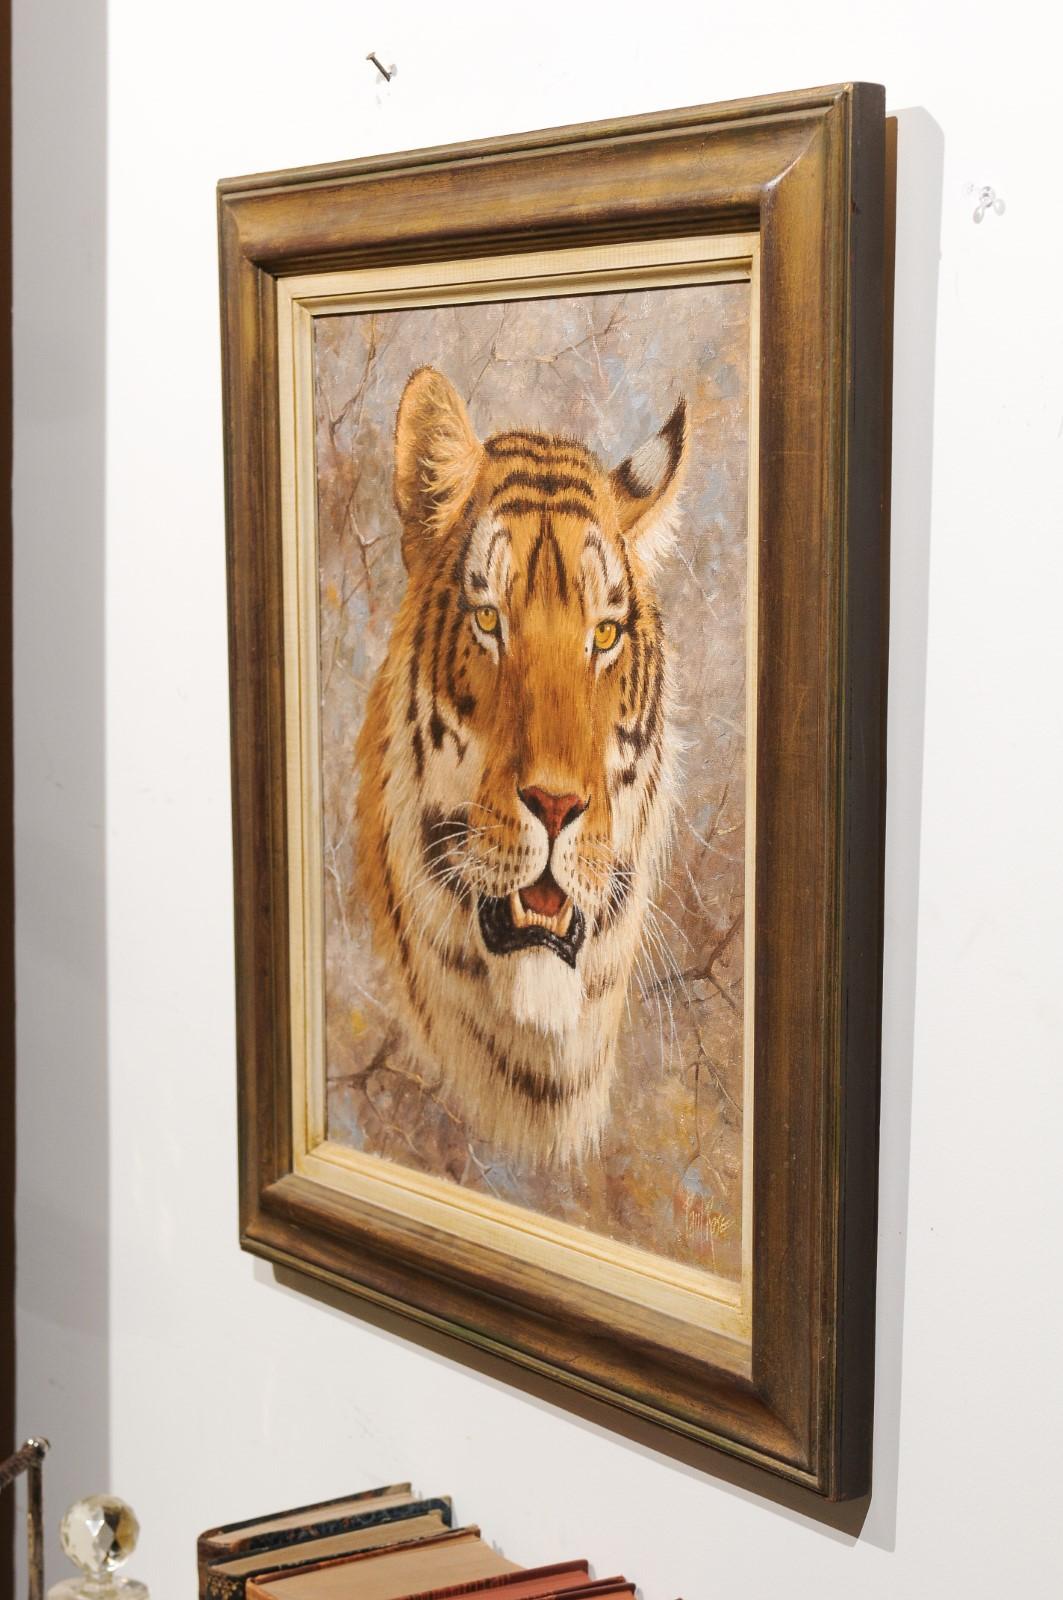 Original Paul Rose Framed and Signed Wildlife Painting Depicting a Tiger Head 3